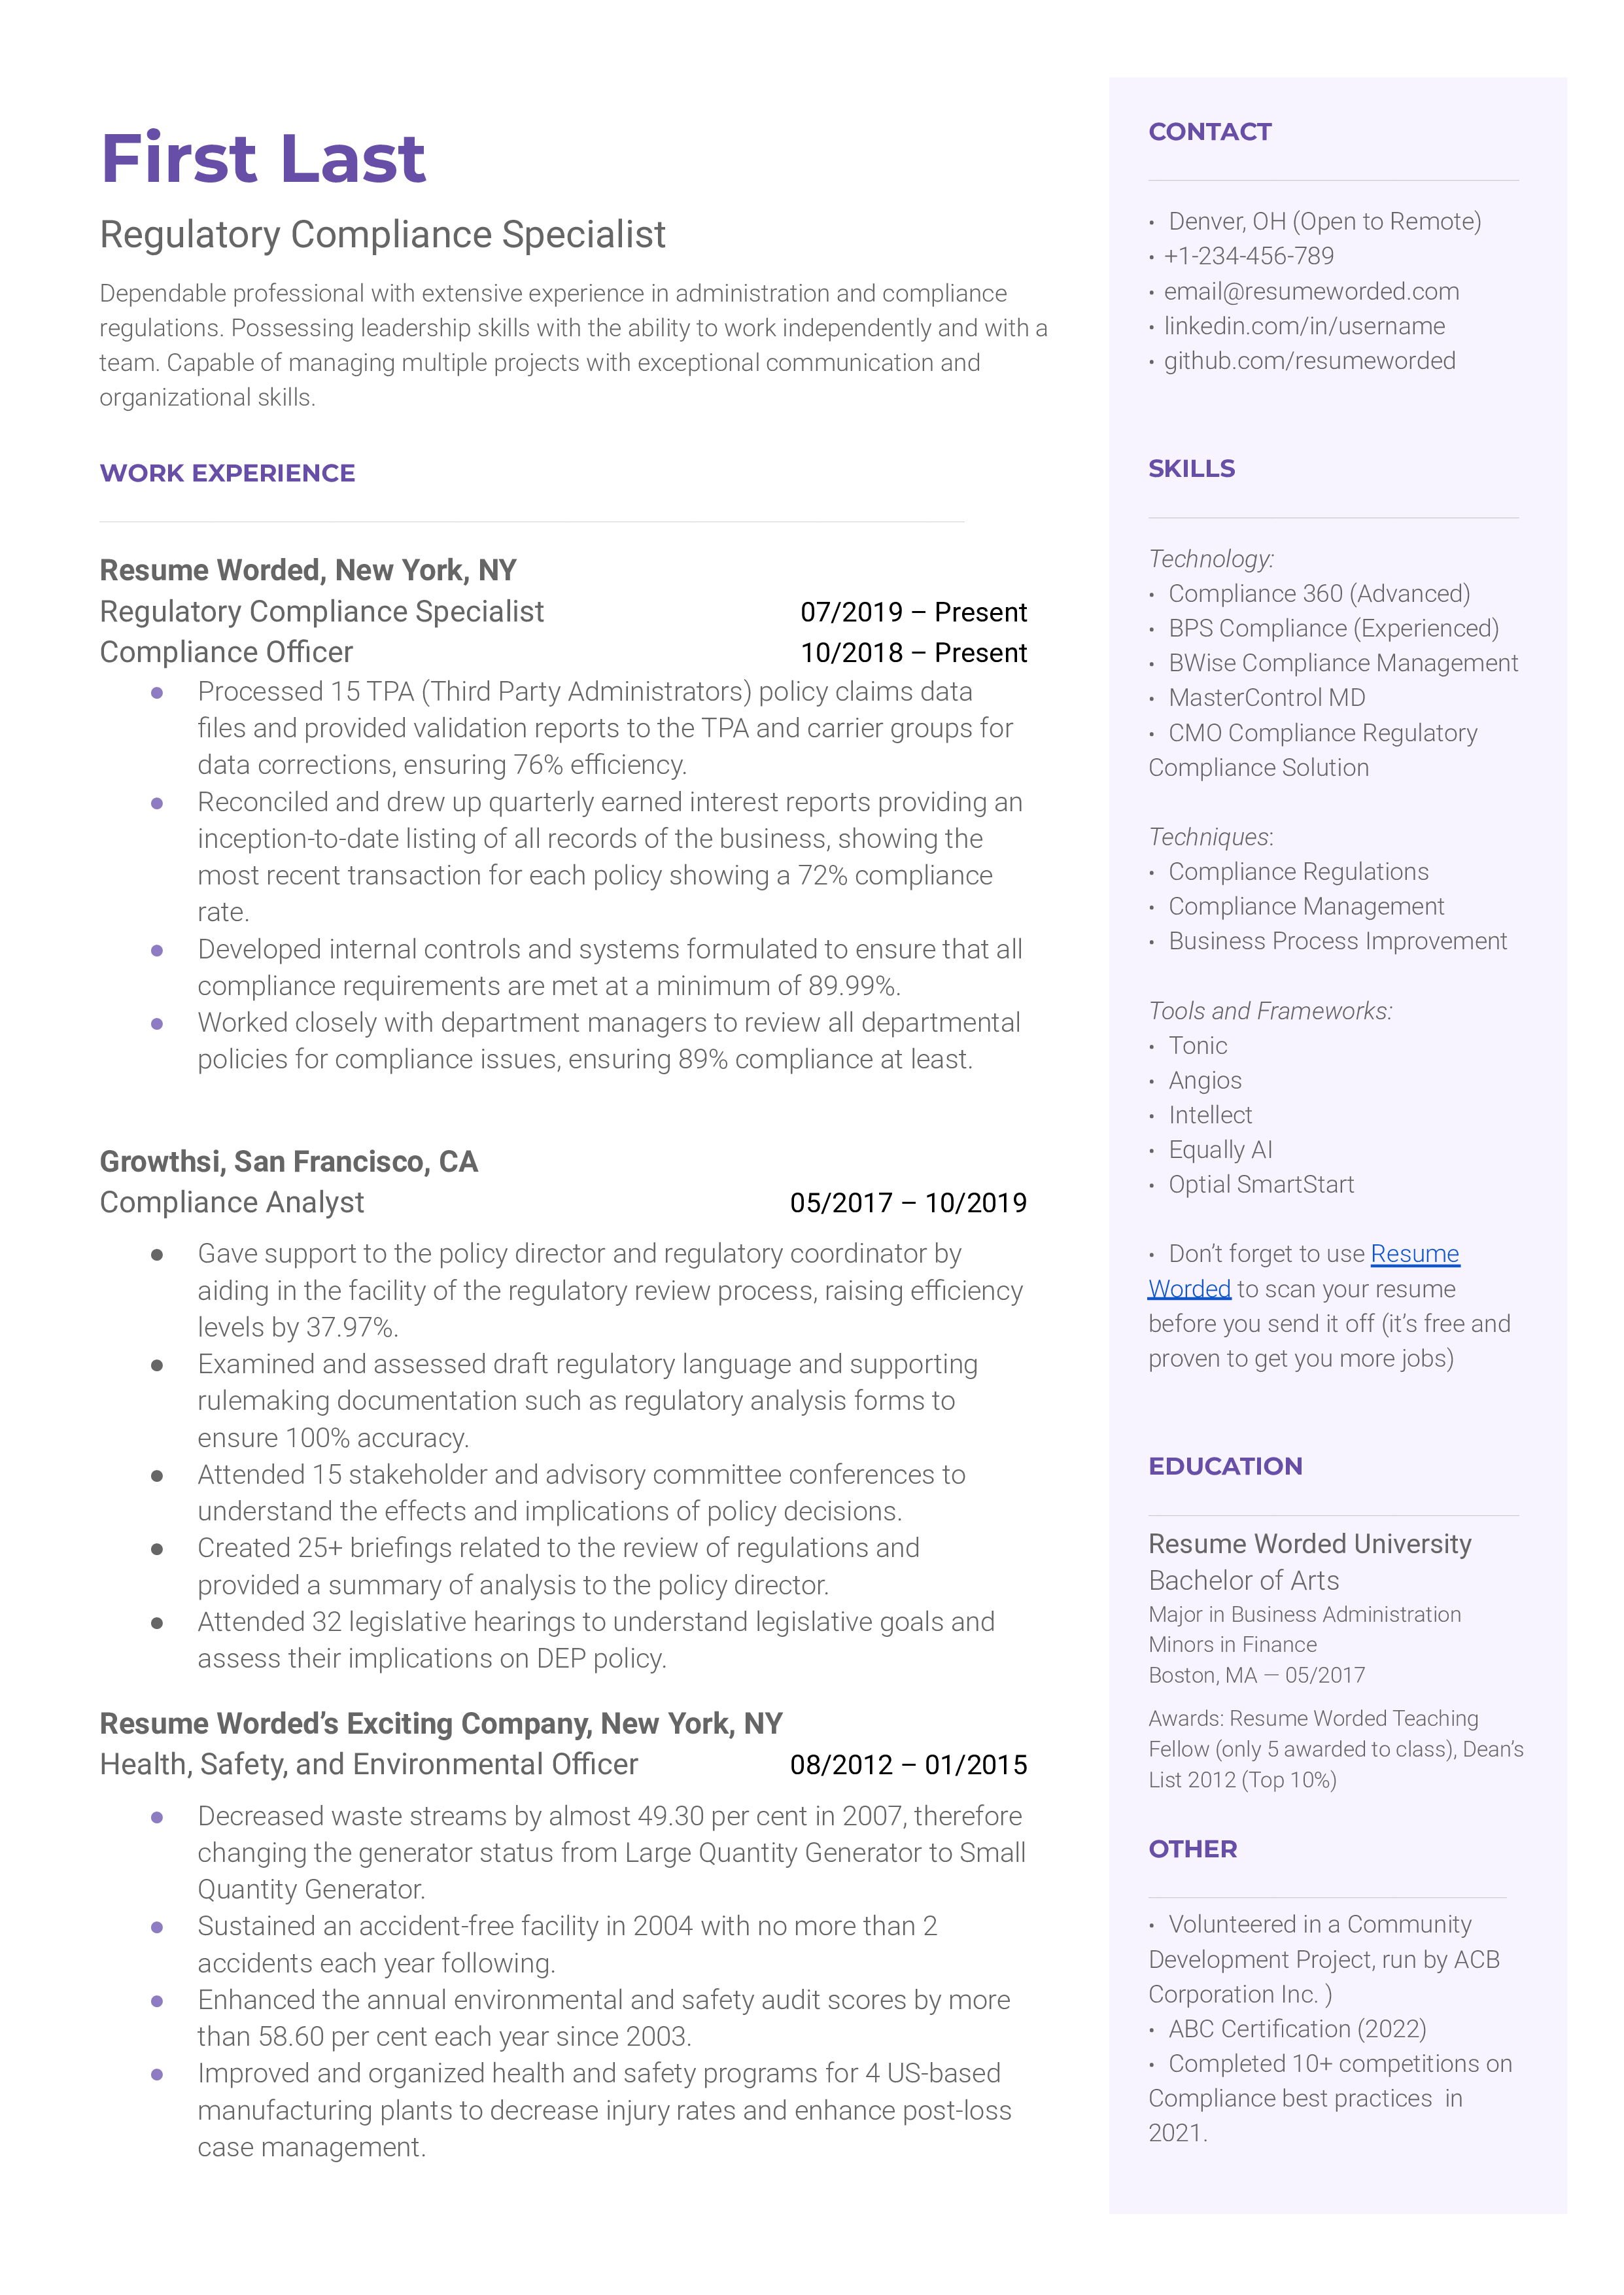 A regulatory compliance specialist resume template that highlights relevant work experience in compliance and working with regulators